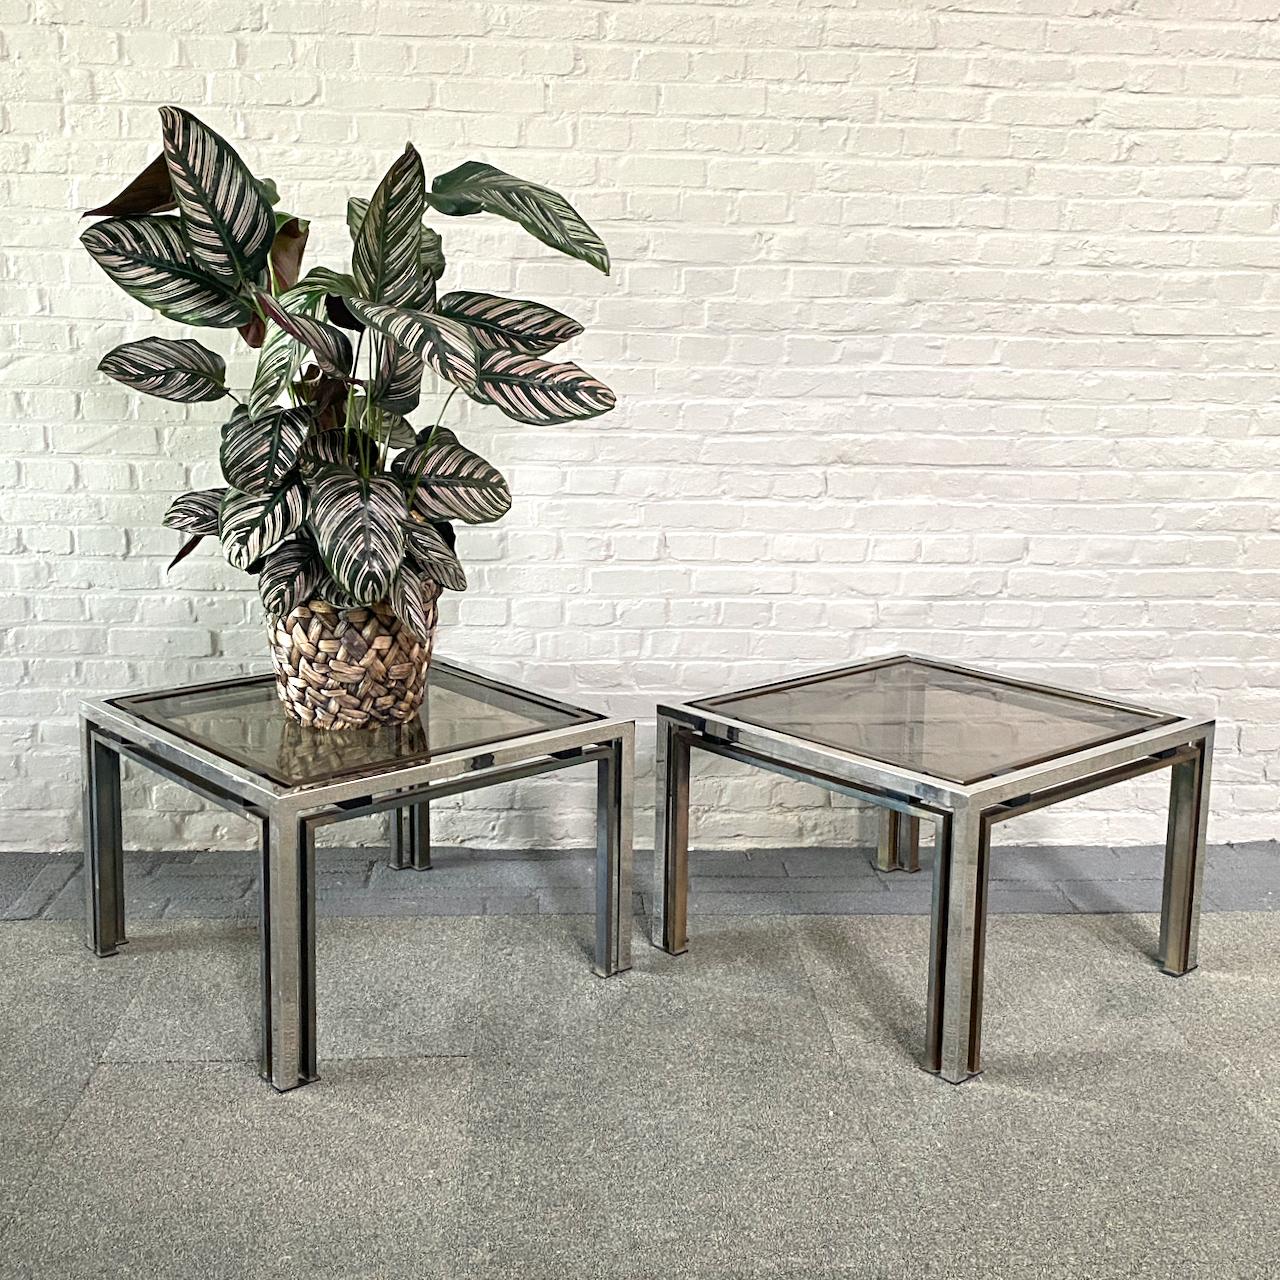 Pair of Romeo Rega chrome & brass side tables

Attributed to Romeo Rega:
He combined modernism with Hollywood Regency glamour.

Untouched brass patina
Chromed
Black acrylic accents
Smoked glass tops
1970's
Italian production

Condition:
The pair of